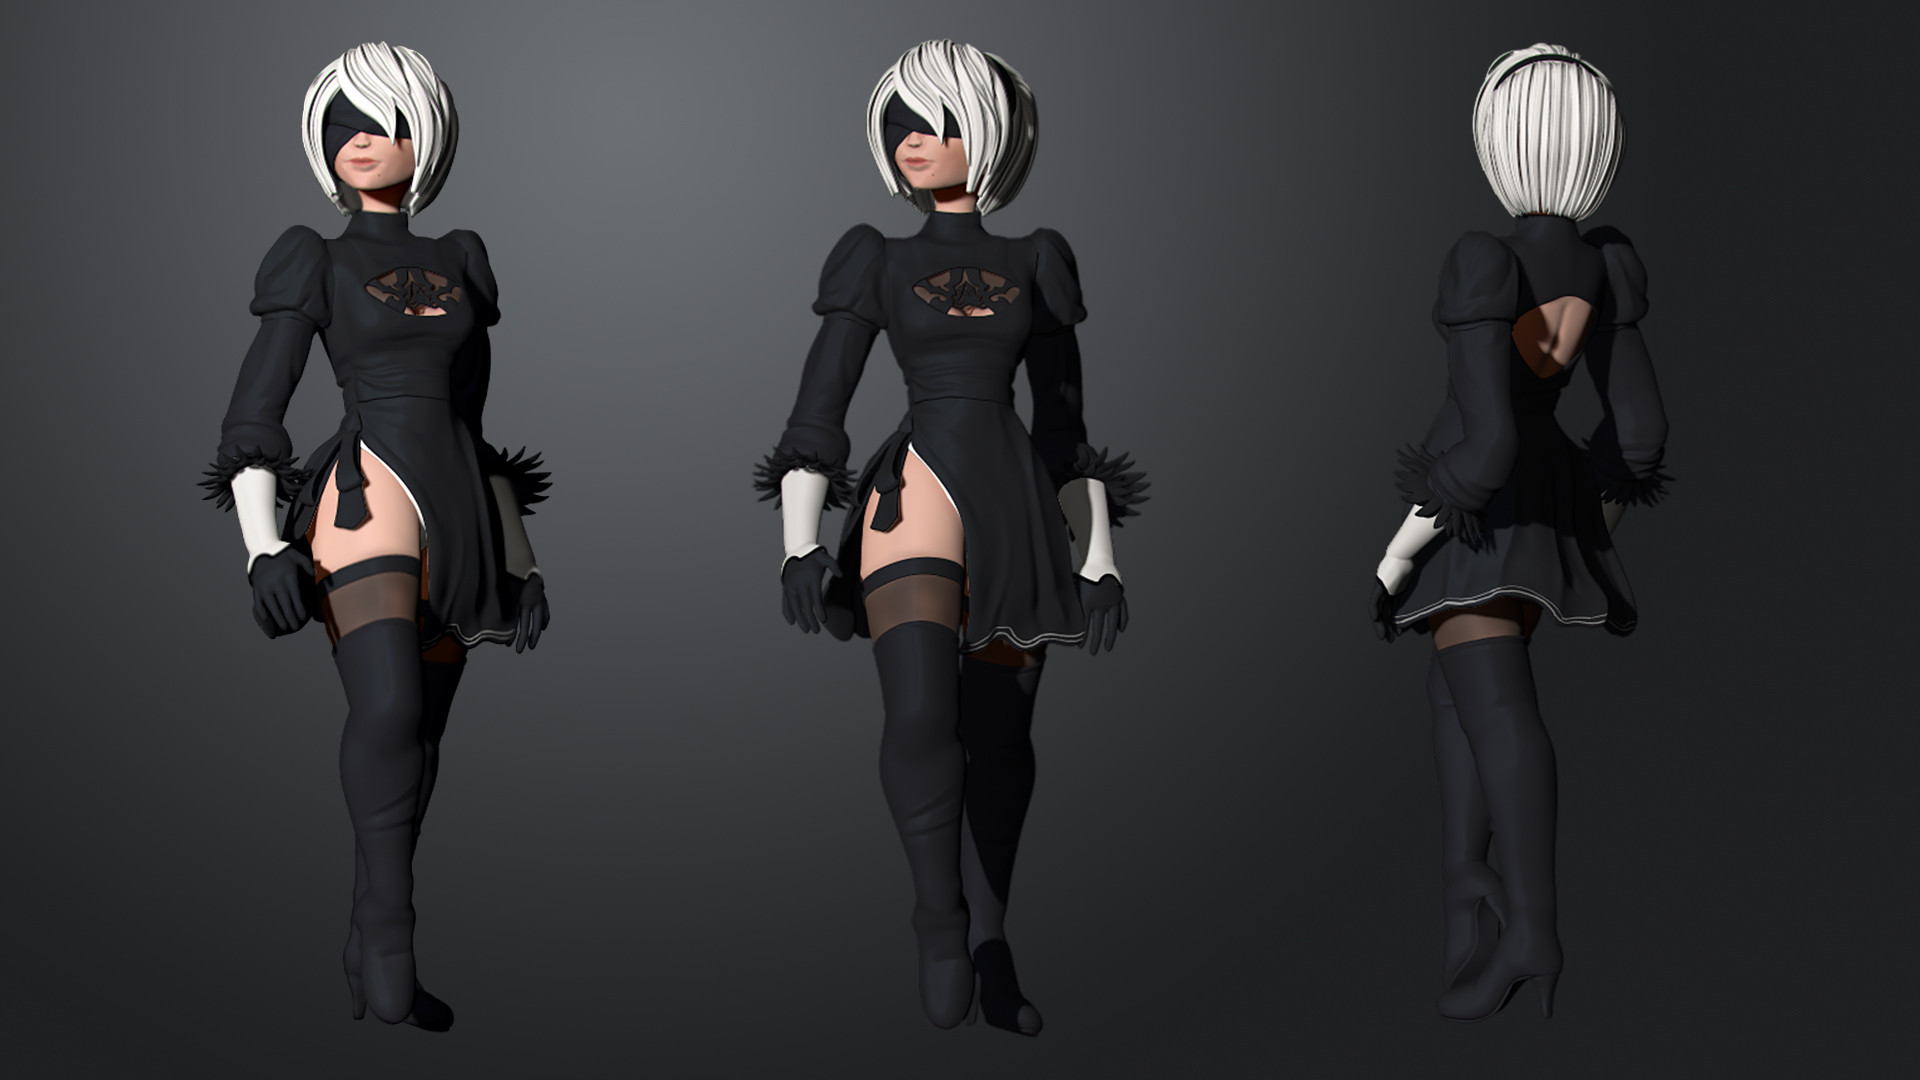 2B NieR Automata Finished Projects Blender Artists, 57% OFF